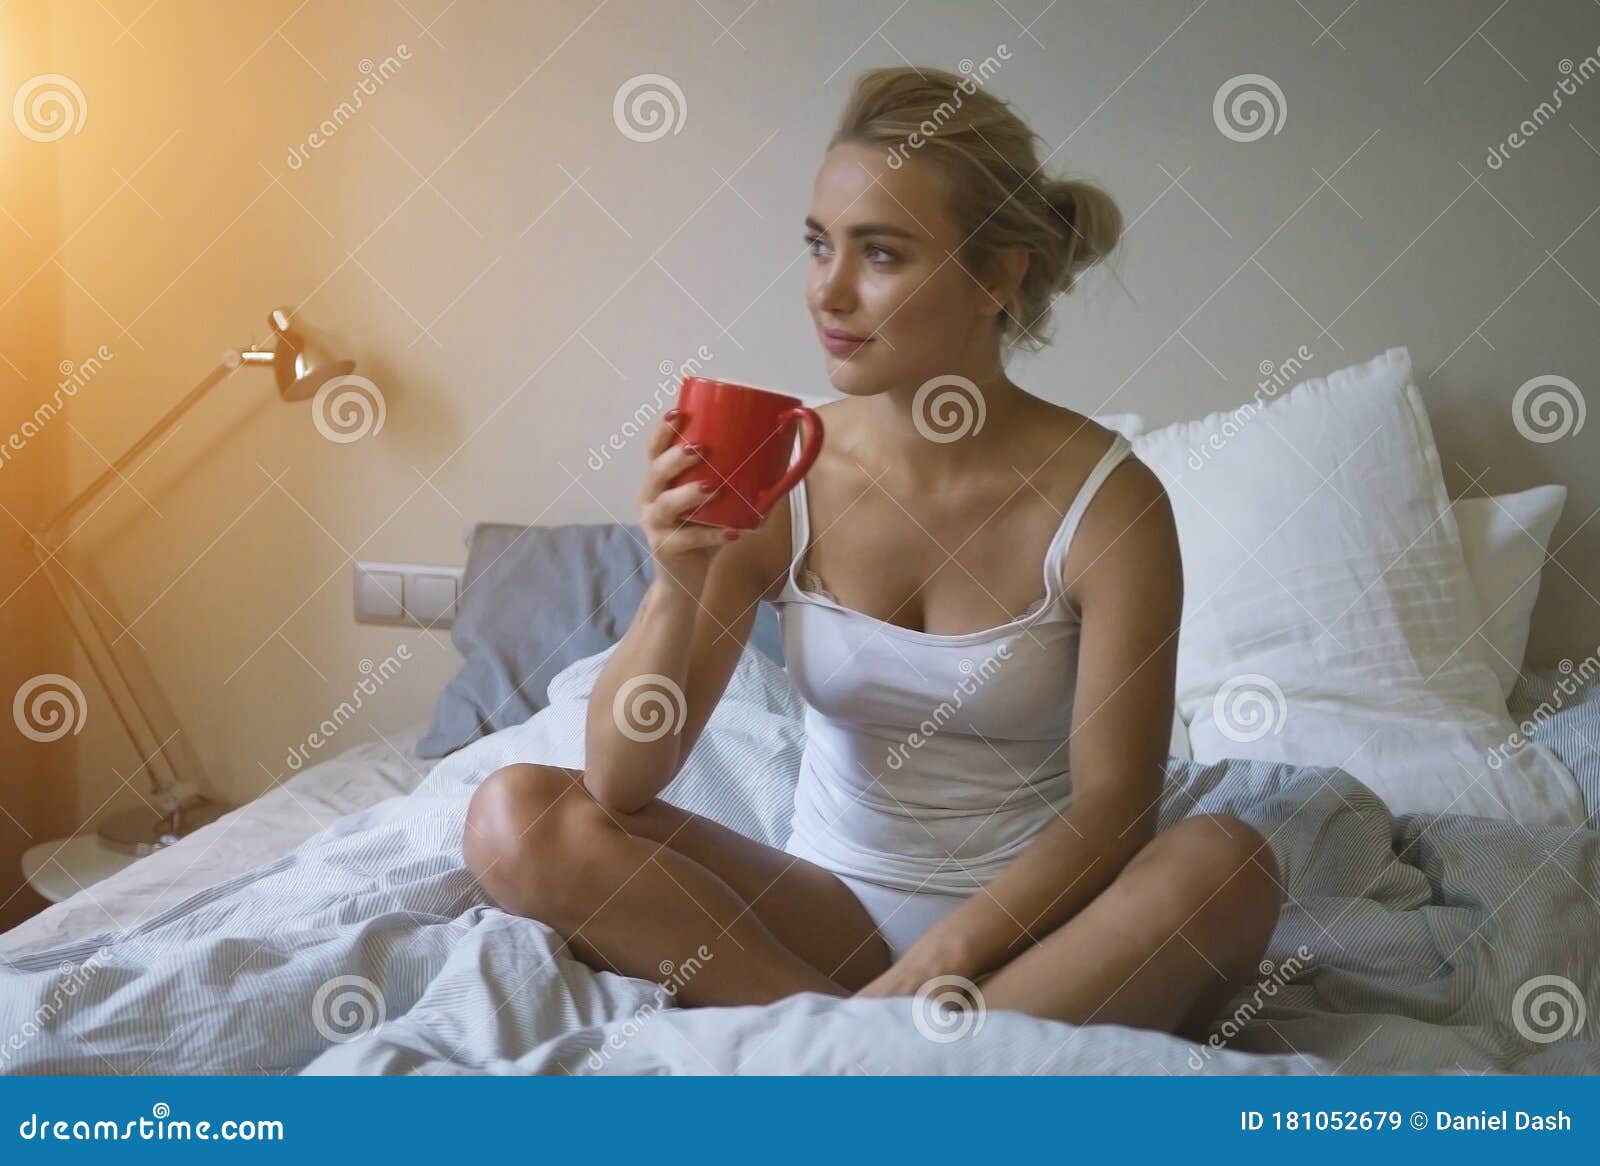 Pretty Woman In White Tank Top And Panties Sitting On Bed And Enjoying Hot Beverage Stock Image 